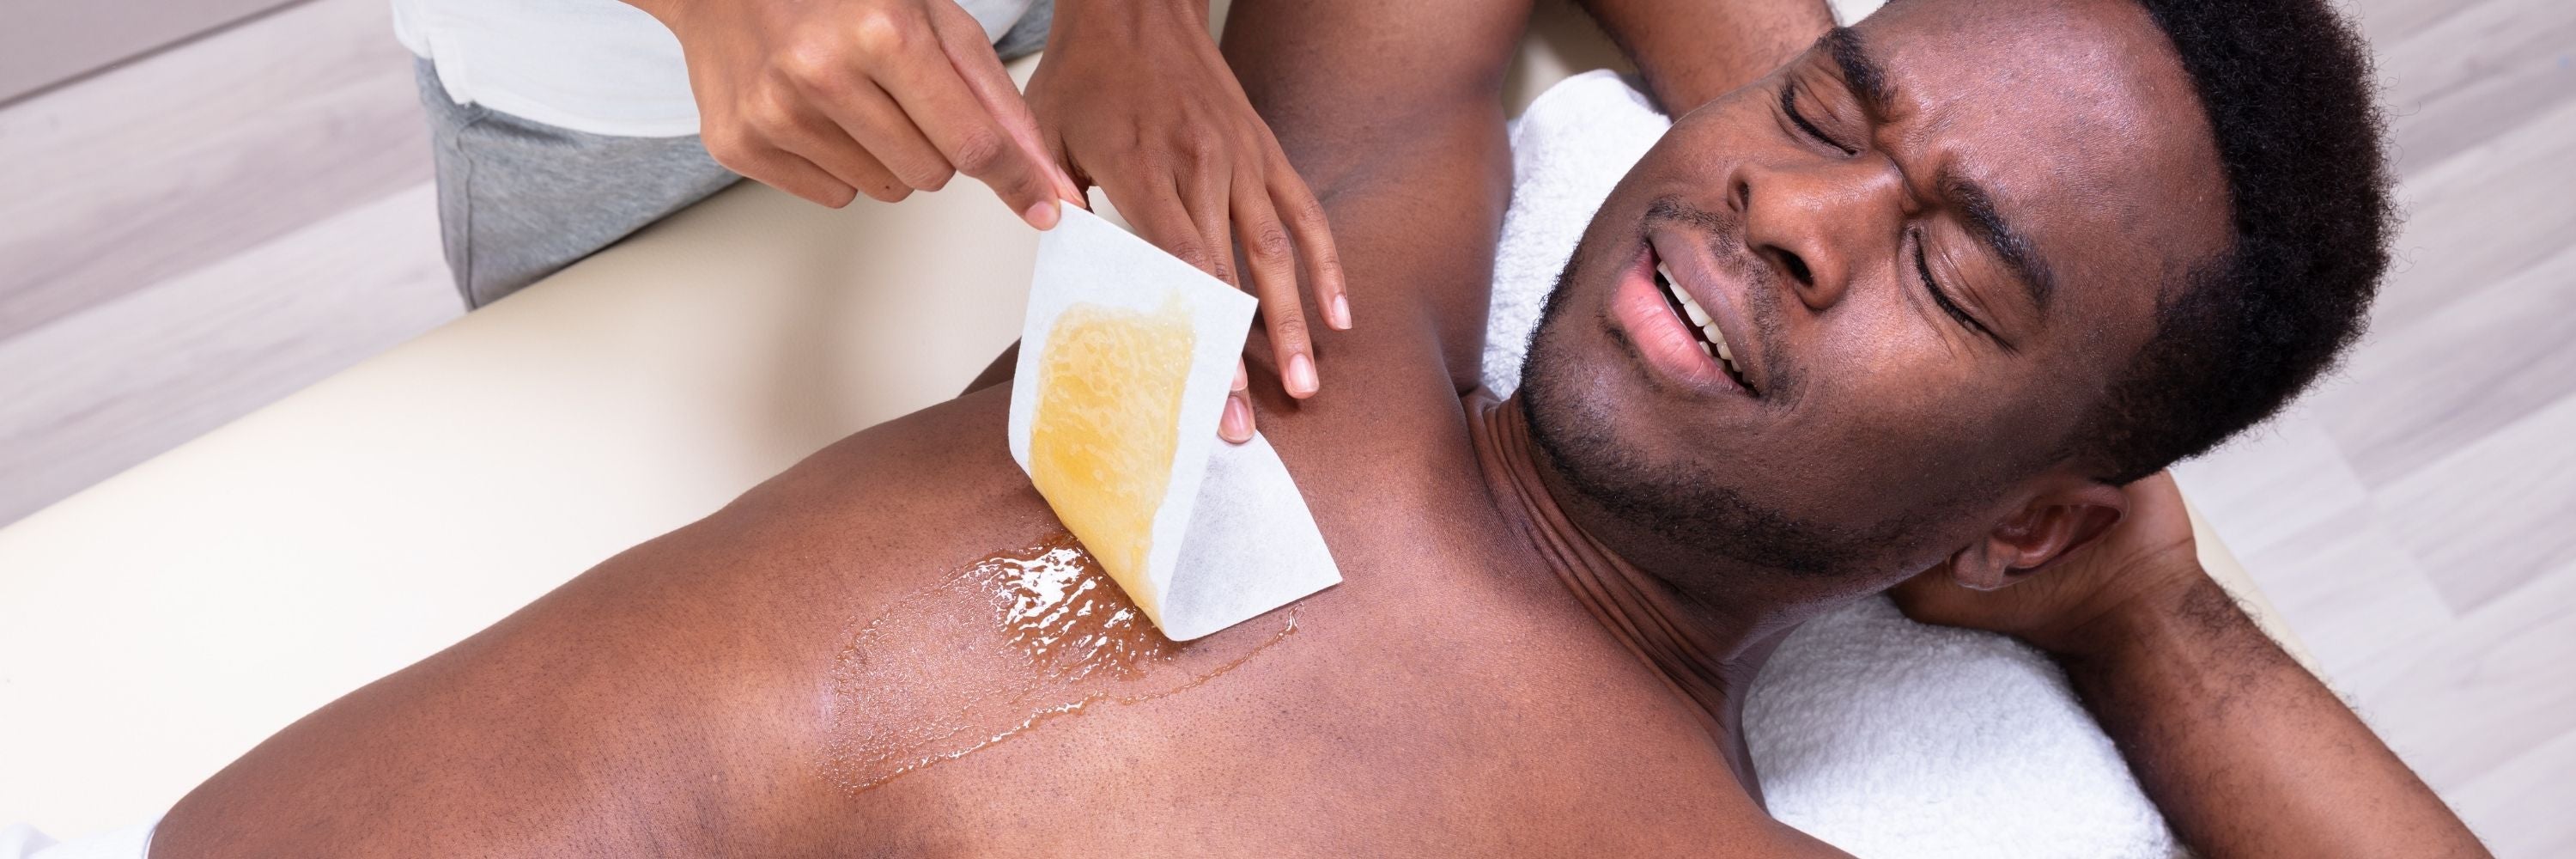 Face Wax for Men, Unwanted Facial Hair Growth on Men